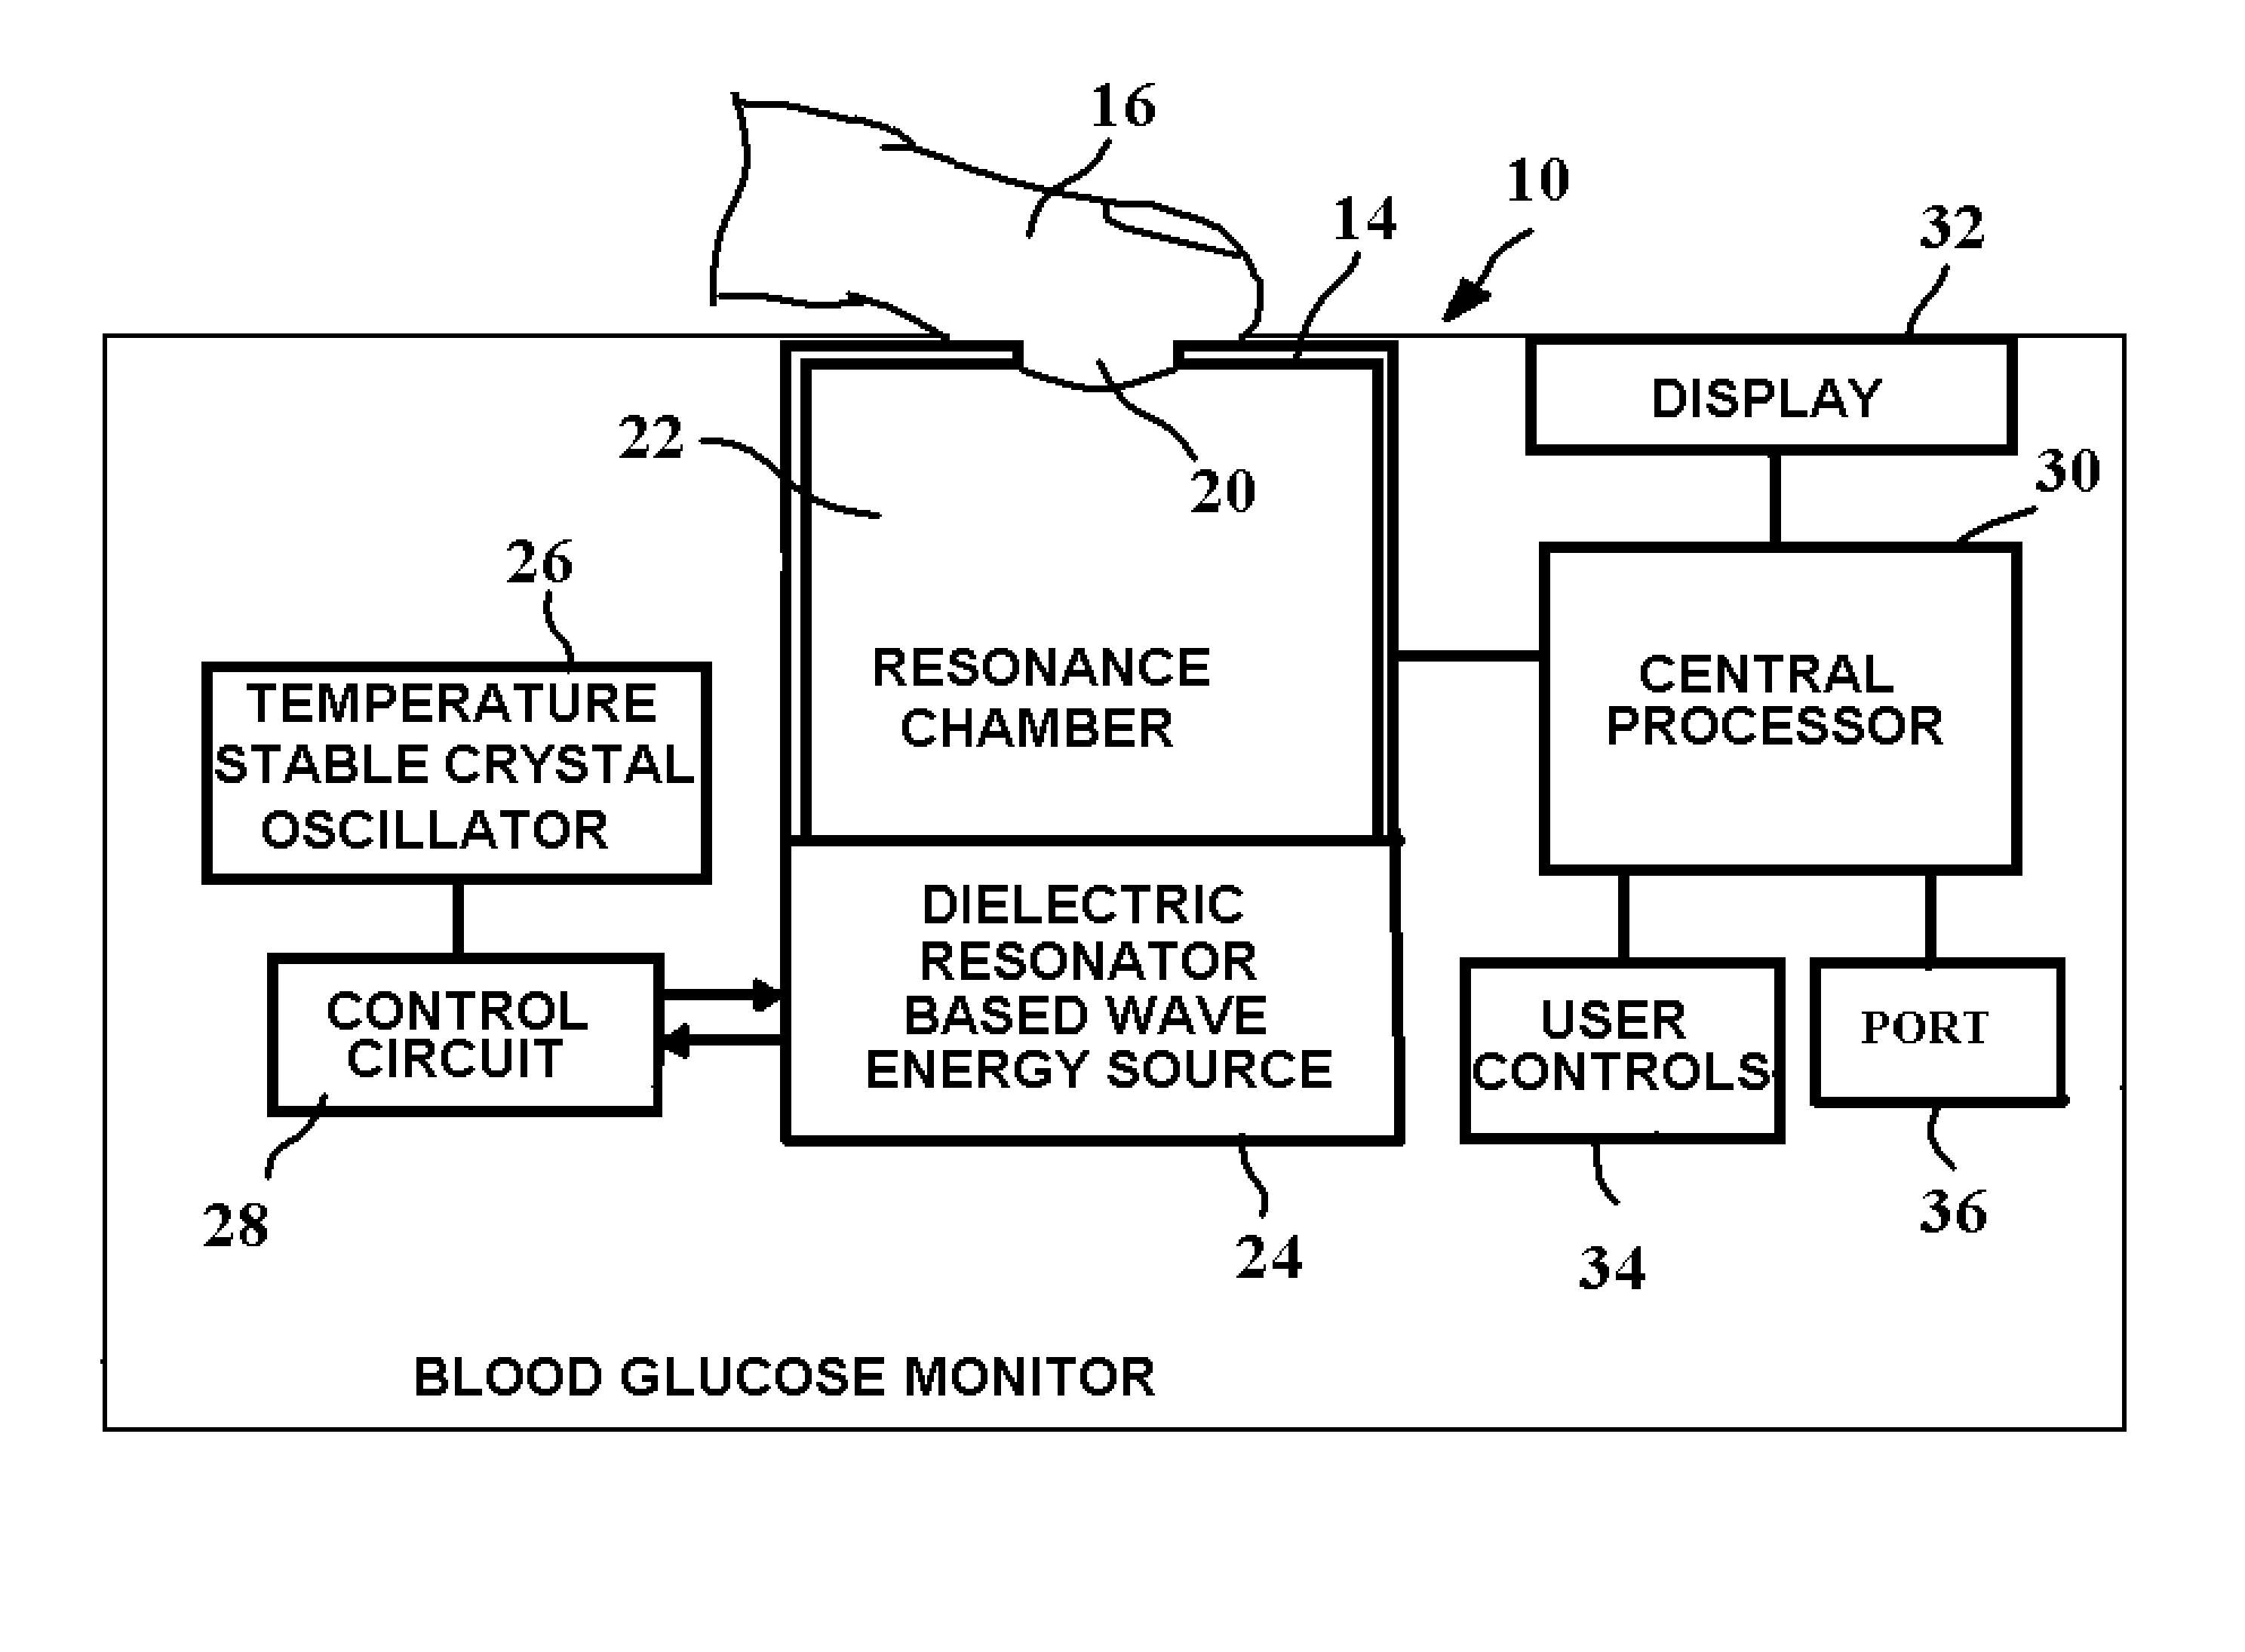 System and method for measuring blood glucose in the human body without a drawn blood sample